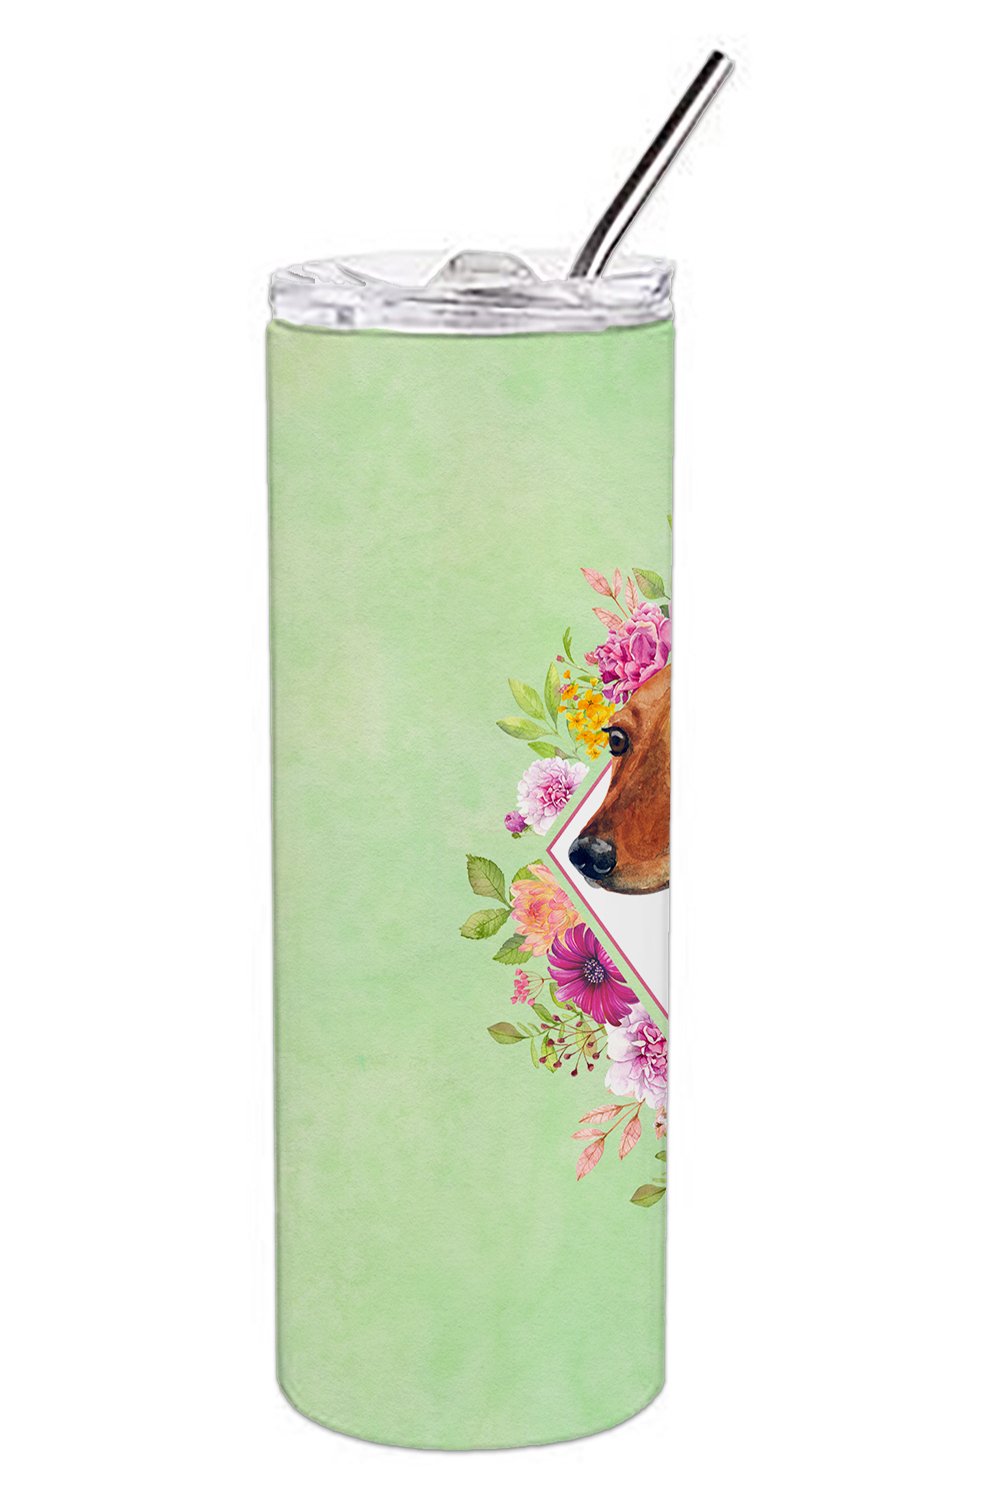 Dachshund Red #1 Green Flowers Double Walled Stainless Steel 20 oz Skinny Tumbler CK4294TBL20 by Caroline's Treasures